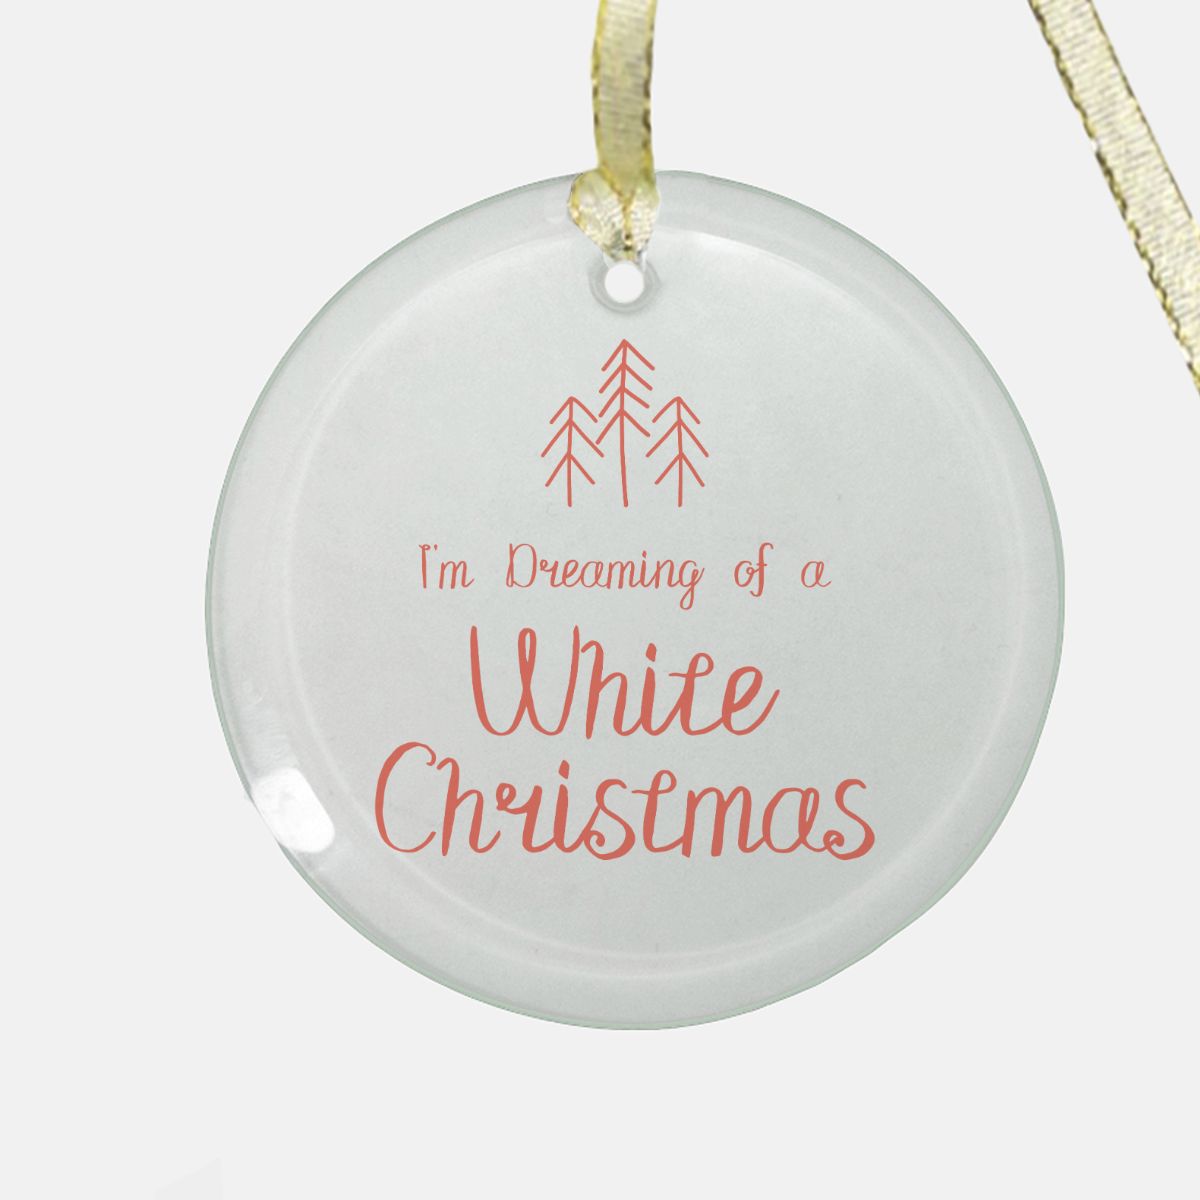 Round Clear Glass Holiday Ornament - White Christmas